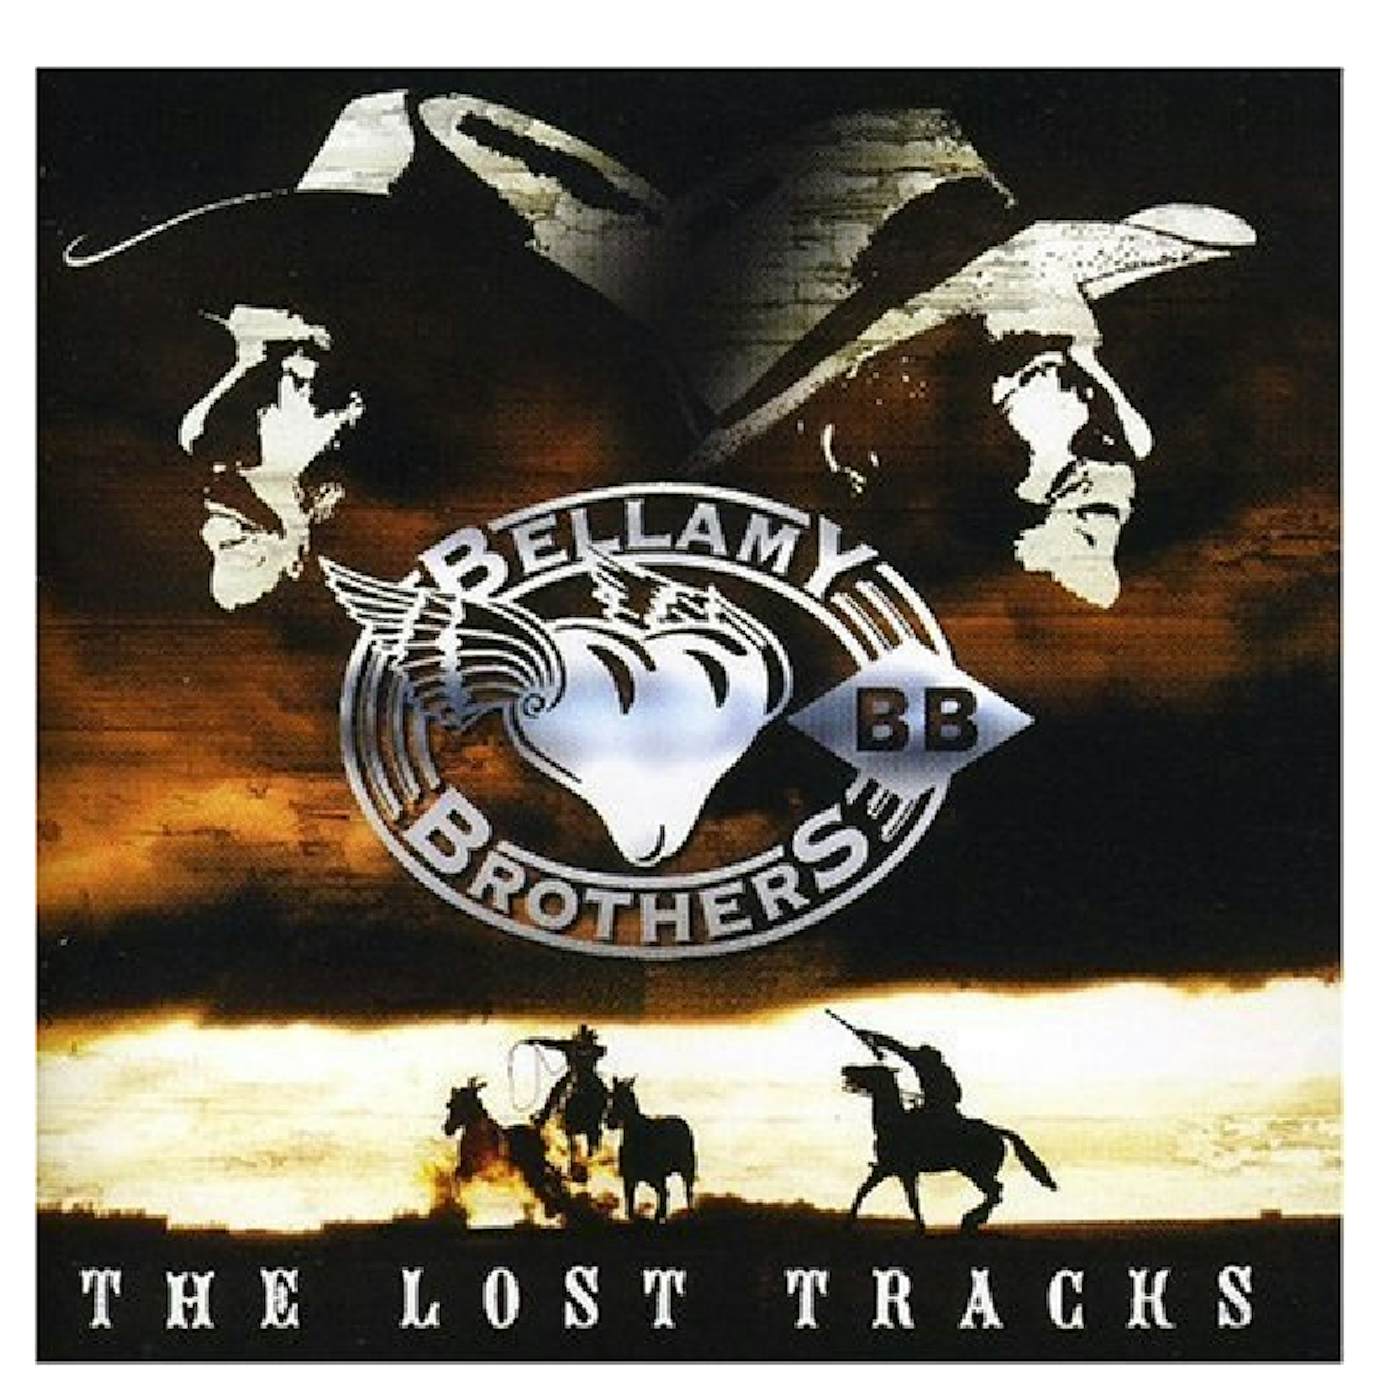 The Bellamy Brothers CD- Lost Tracks